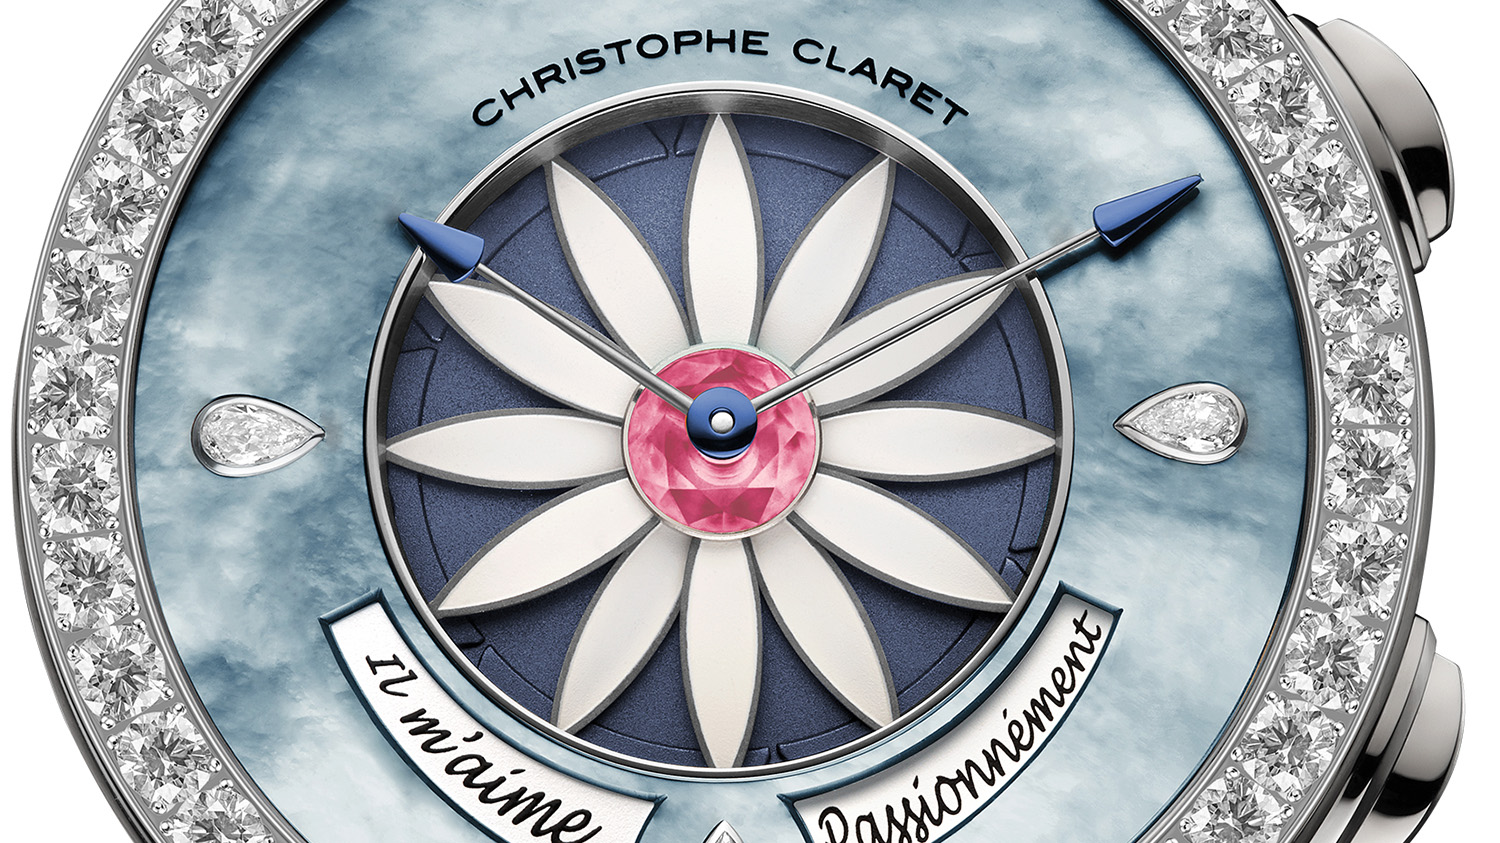 Pre-SIHH Intro: Margot Velvet Blossoms in a New Limited Edition from Christophe Claret